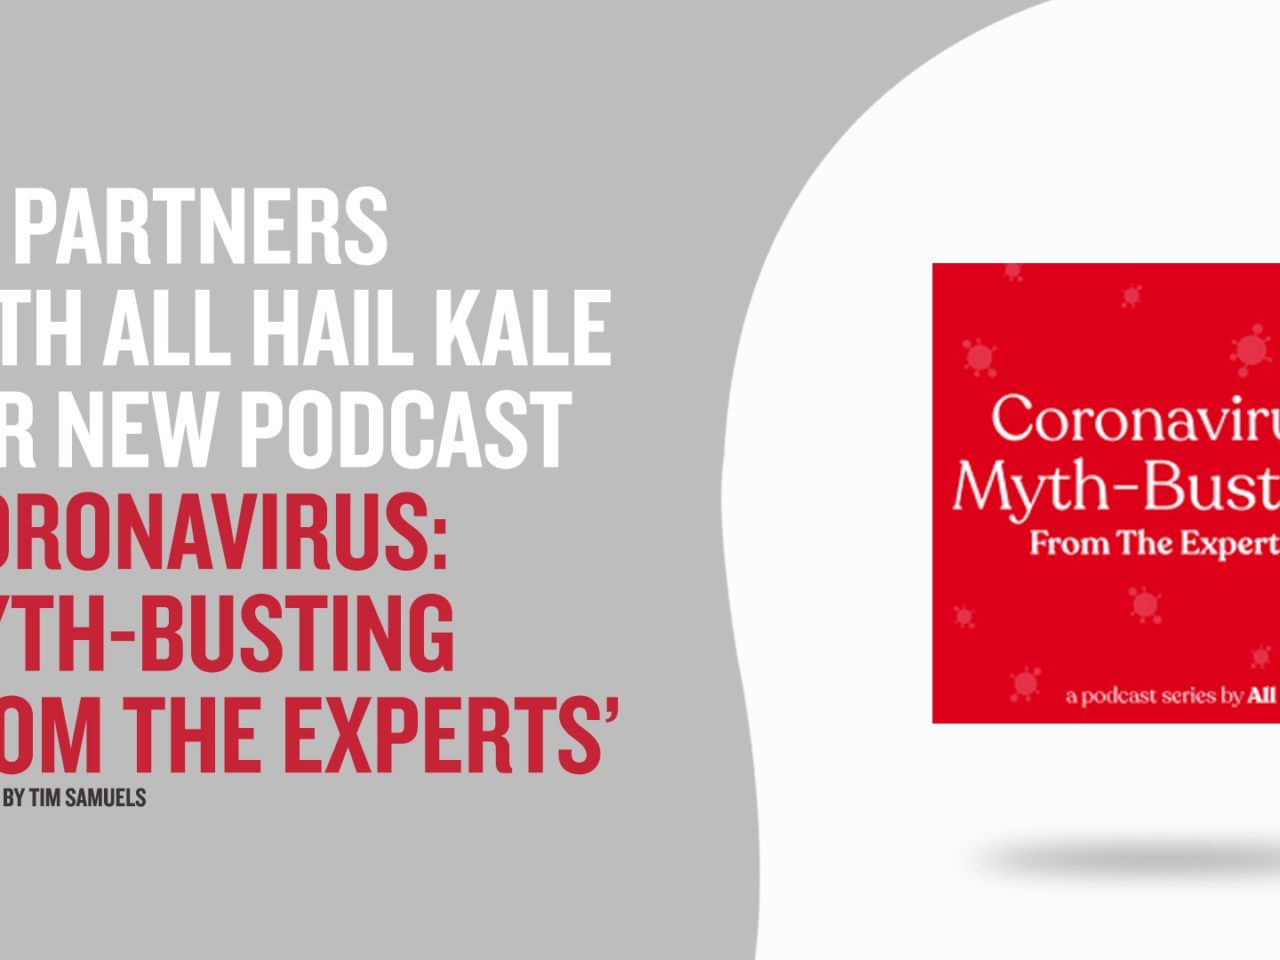 Coronavirus ~ Myth-Busting From the Experts